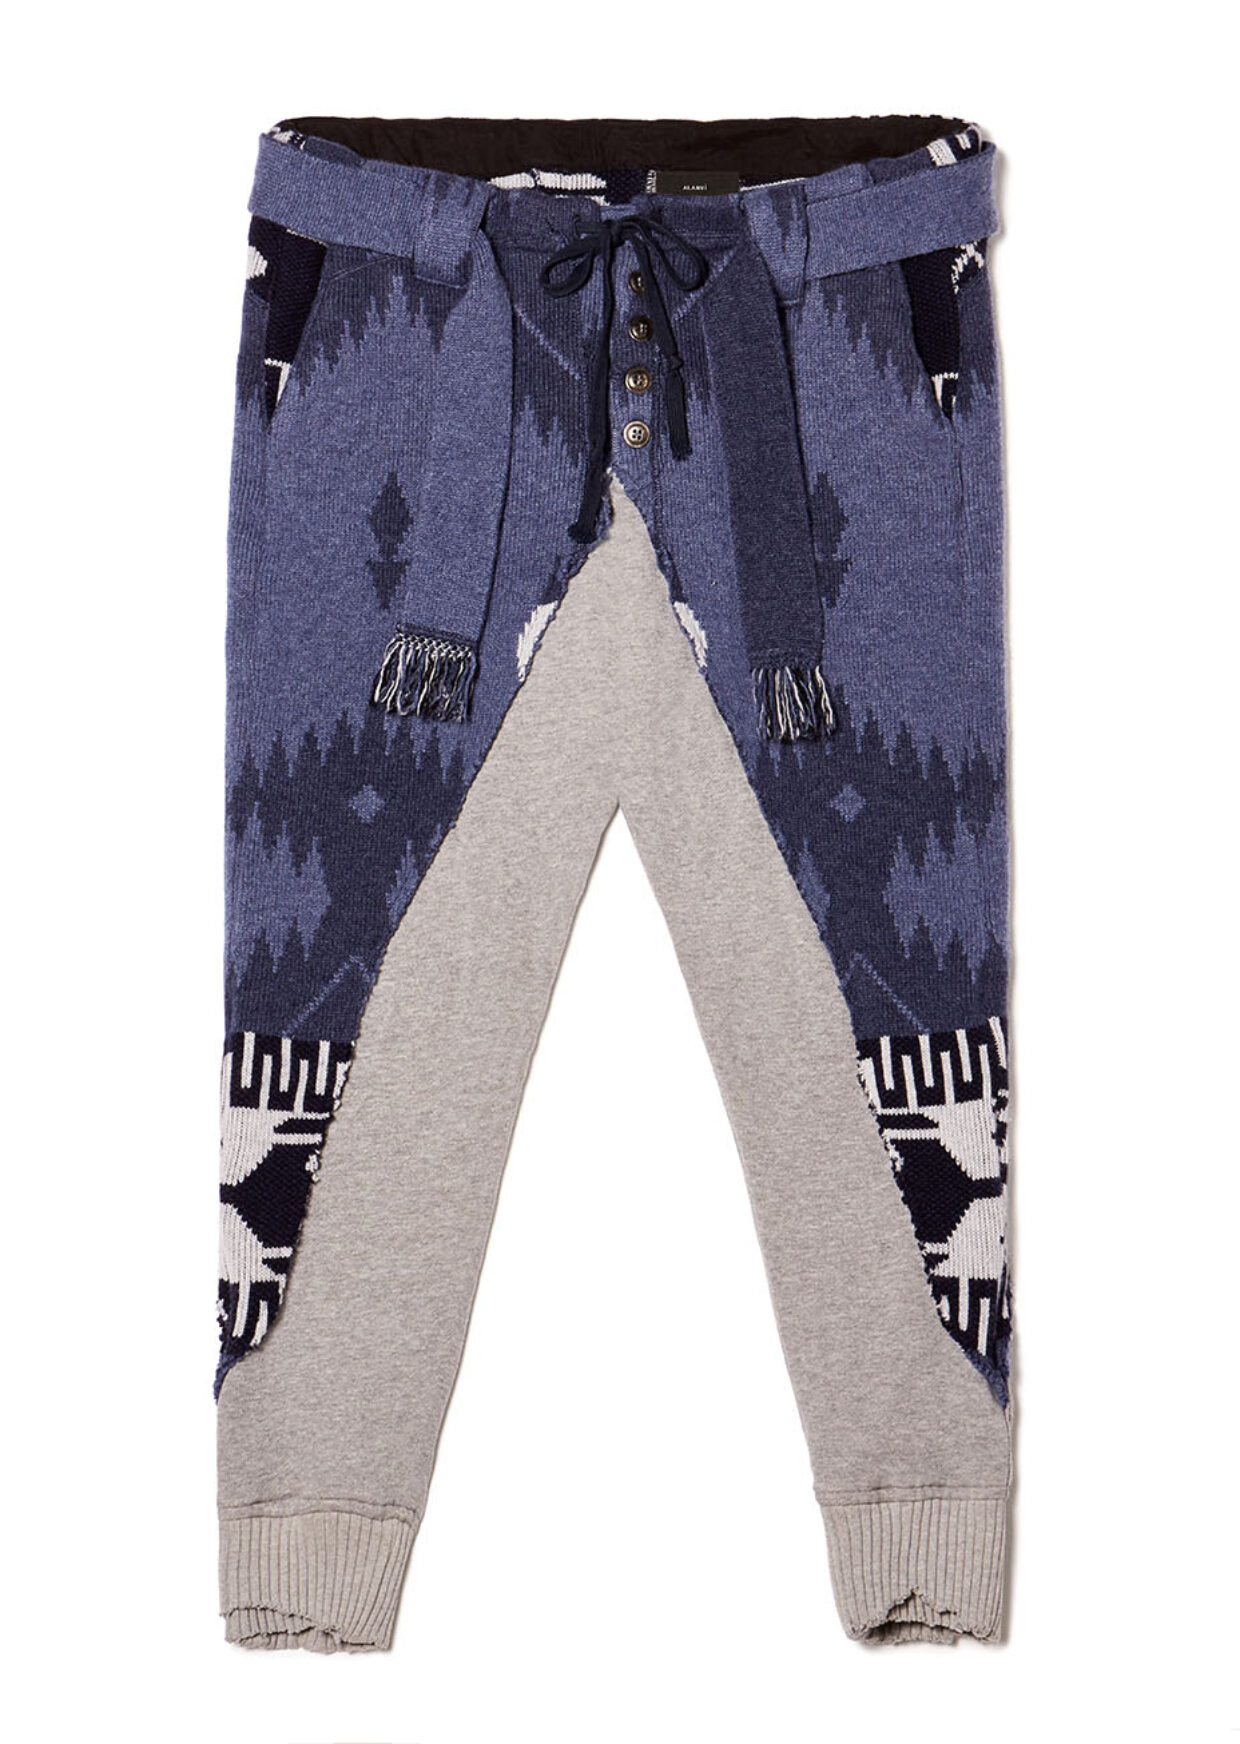 L.A. Designer Greg Lauren Has Cozy New Knitwear Collab With Americana Vibe | 4